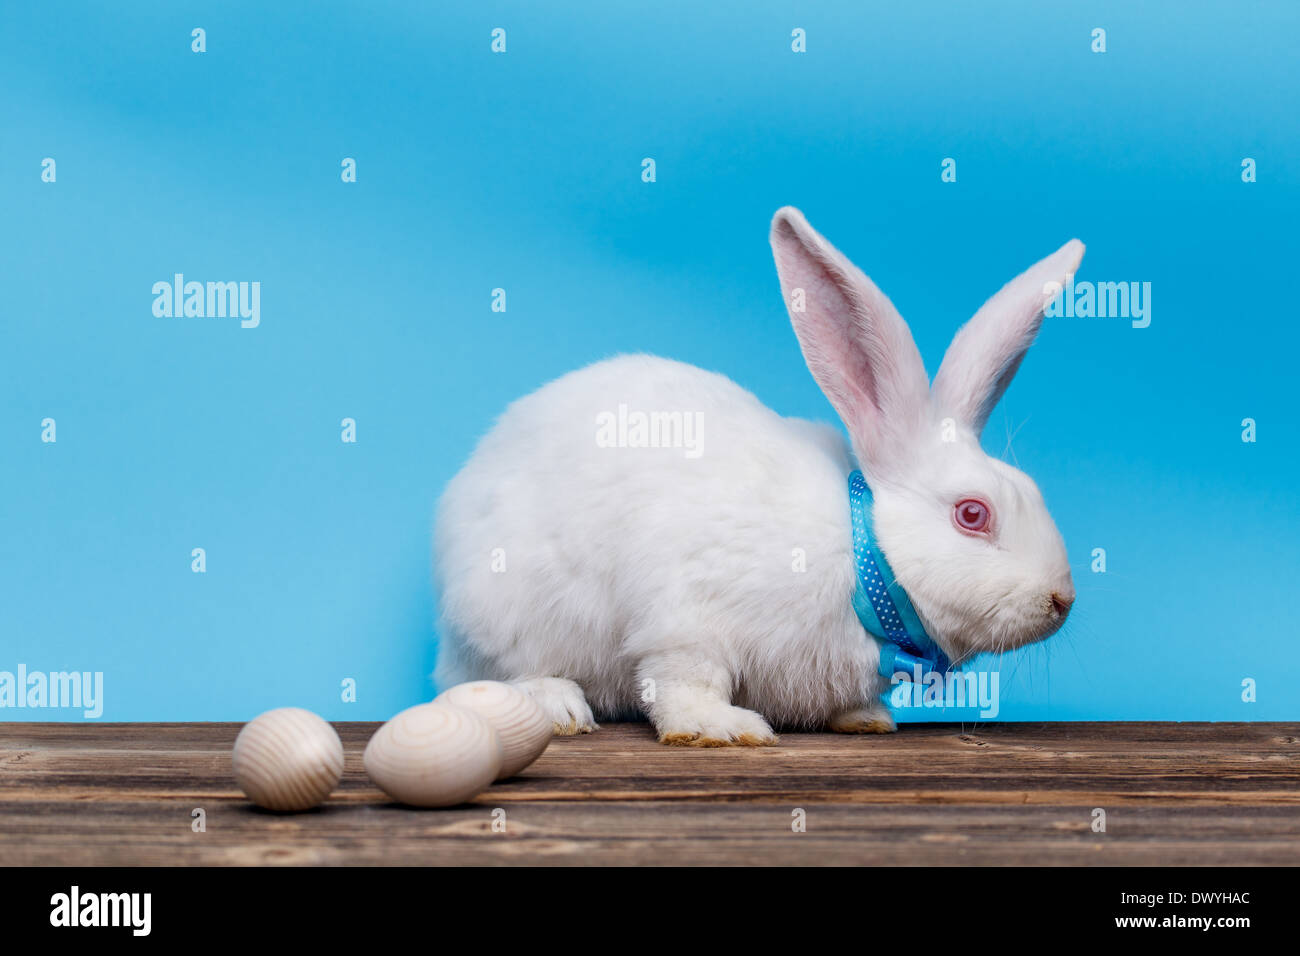 Easter white rabbit with wooden eggs on blue background Stock Photo